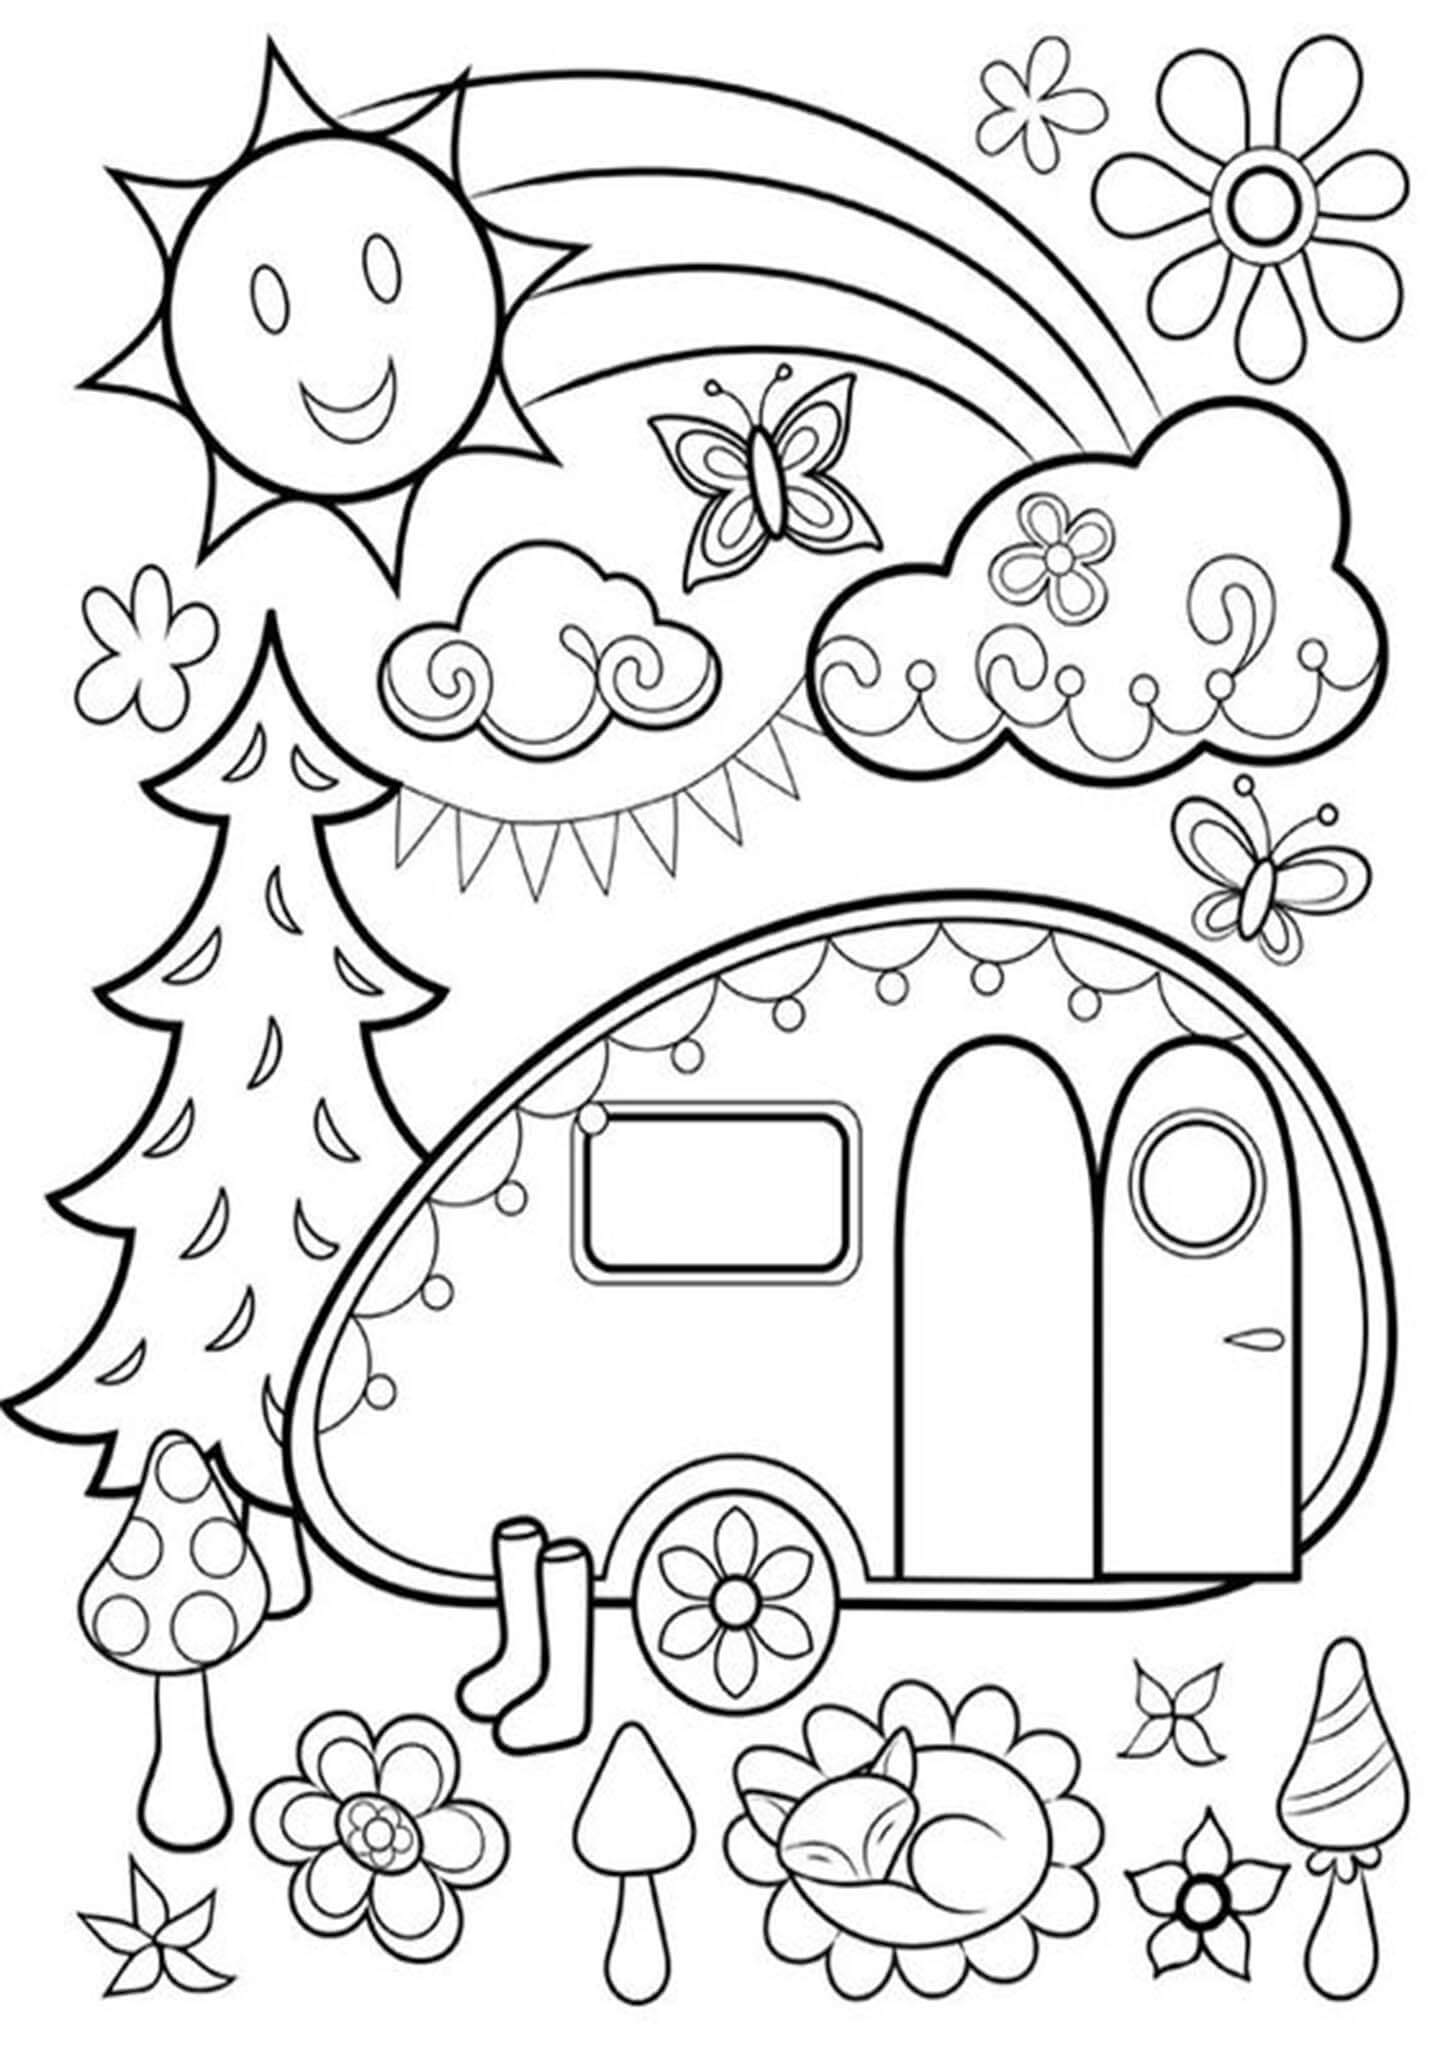 free-easy-to-print-camping-coloring-pages-tulamama